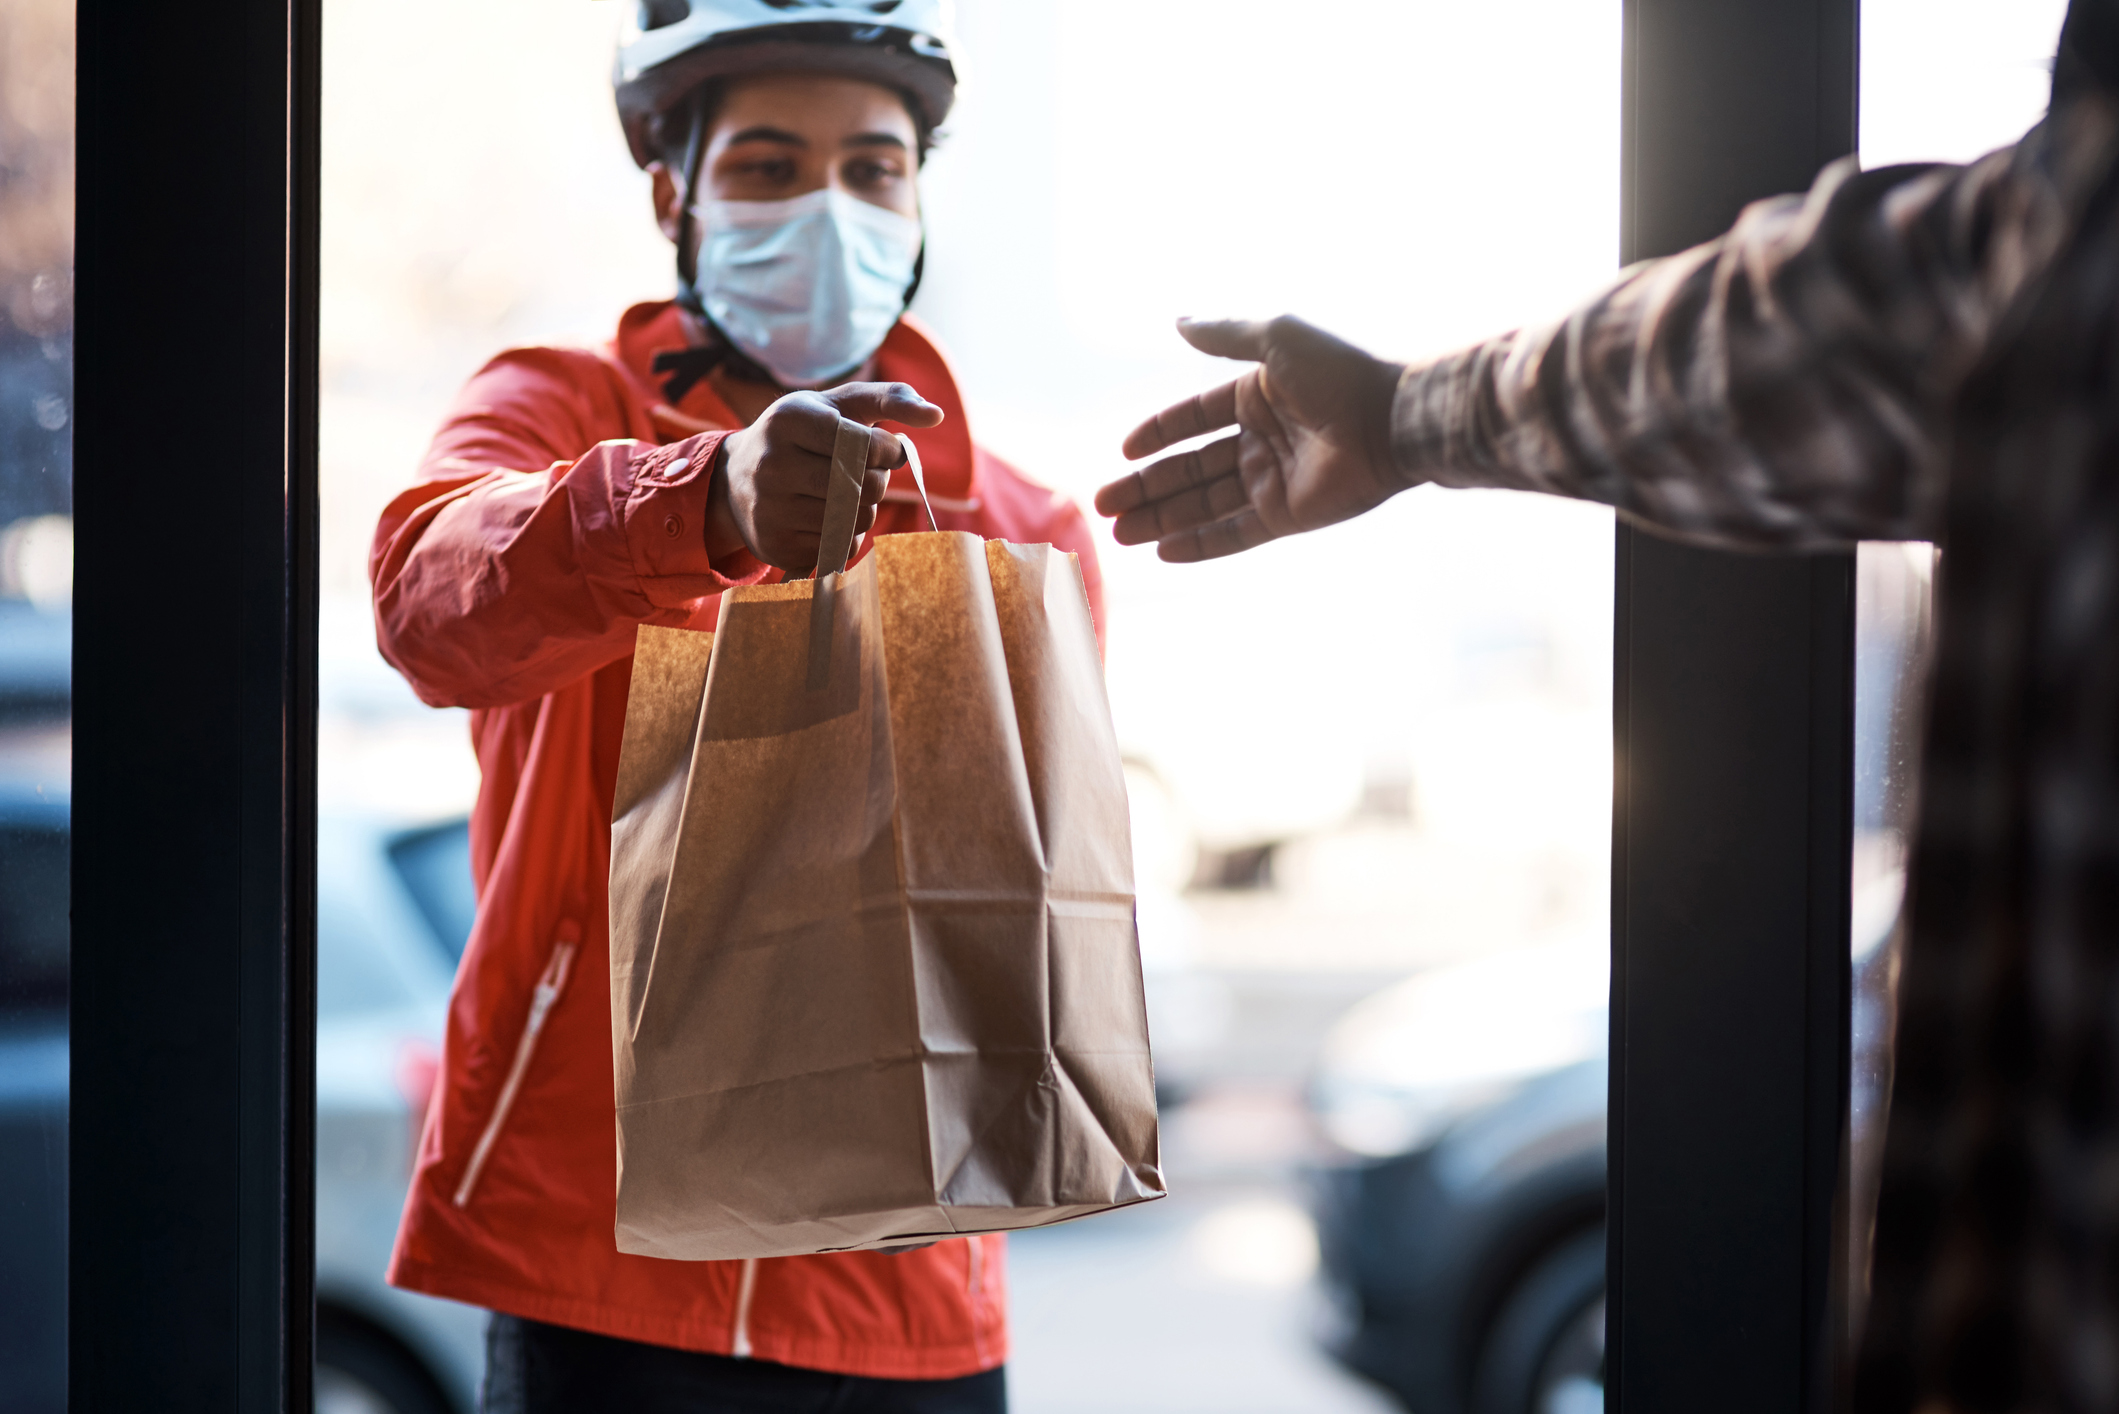 Delivery man delivering grocery bag wearing face mask and gloves